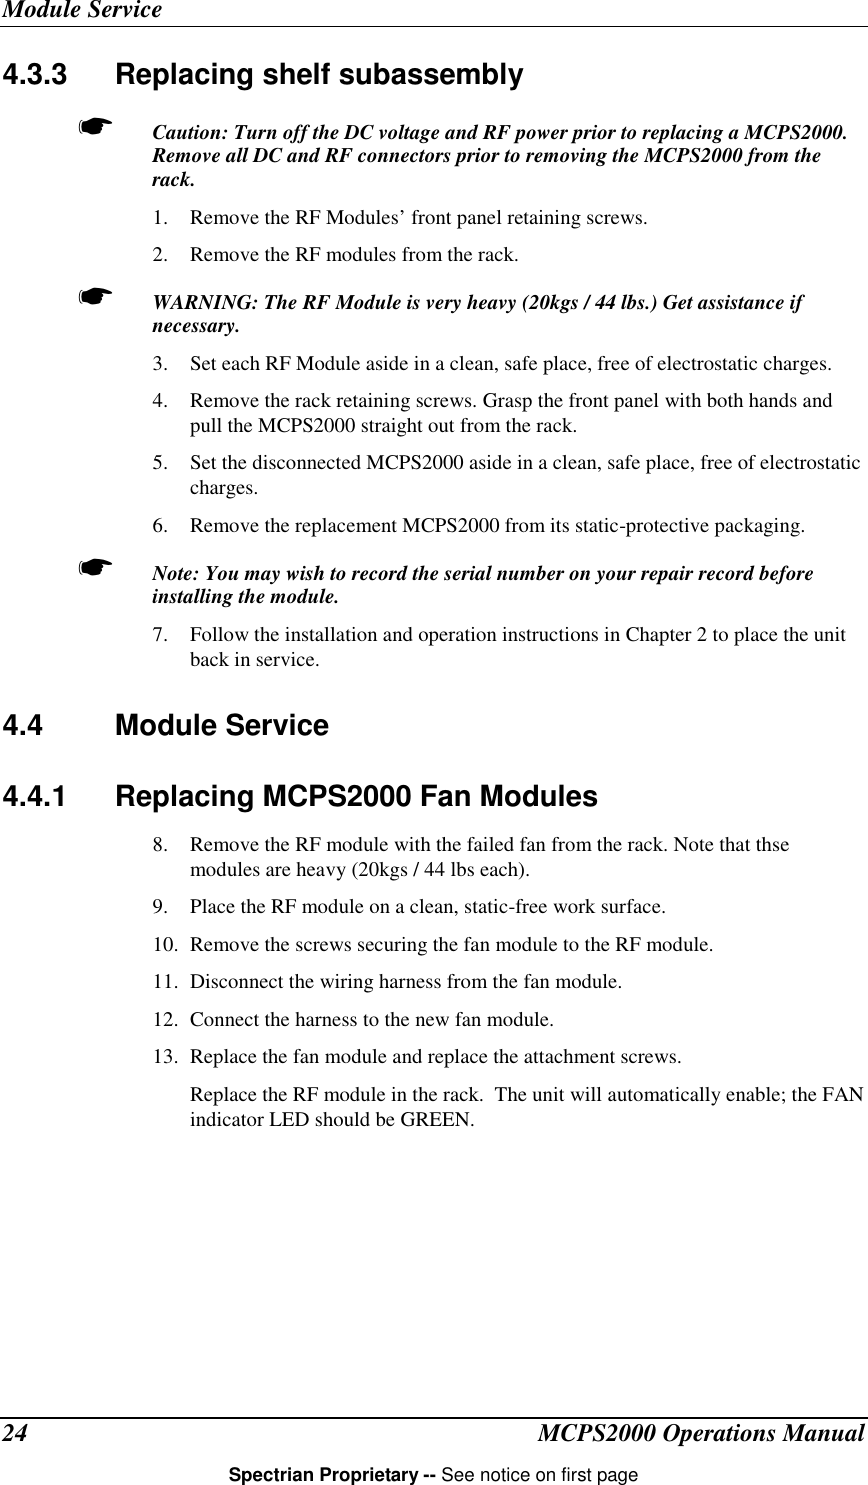 Module ServiceMCPS2000 Operations ManualSpectrian Proprietary -- See notice on first page244.3.3  Replacing shelf subassembly☛ Caution: Turn off the DC voltage and RF power prior to replacing a MCPS2000.Remove all DC and RF connectors prior to removing the MCPS2000 from therack.1. Remove the RF Modules’ front panel retaining screws.2. Remove the RF modules from the rack.☛ WARNING: The RF Module is very heavy (20kgs / 44 lbs.) Get assistance ifnecessary.3. Set each RF Module aside in a clean, safe place, free of electrostatic charges.4. Remove the rack retaining screws. Grasp the front panel with both hands andpull the MCPS2000 straight out from the rack.5. Set the disconnected MCPS2000 aside in a clean, safe place, free of electrostaticcharges.6. Remove the replacement MCPS2000 from its static-protective packaging.☛ Note: You may wish to record the serial number on your repair record beforeinstalling the module.7. Follow the installation and operation instructions in Chapter 2 to place the unitback in service.4.4 Module Service4.4.1  Replacing MCPS2000 Fan Modules8. Remove the RF module with the failed fan from the rack. Note that thsemodules are heavy (20kgs / 44 lbs each).9. Place the RF module on a clean, static-free work surface.10. Remove the screws securing the fan module to the RF module.11. Disconnect the wiring harness from the fan module.12. Connect the harness to the new fan module.13. Replace the fan module and replace the attachment screws.Replace the RF module in the rack.  The unit will automatically enable; the FANindicator LED should be GREEN.